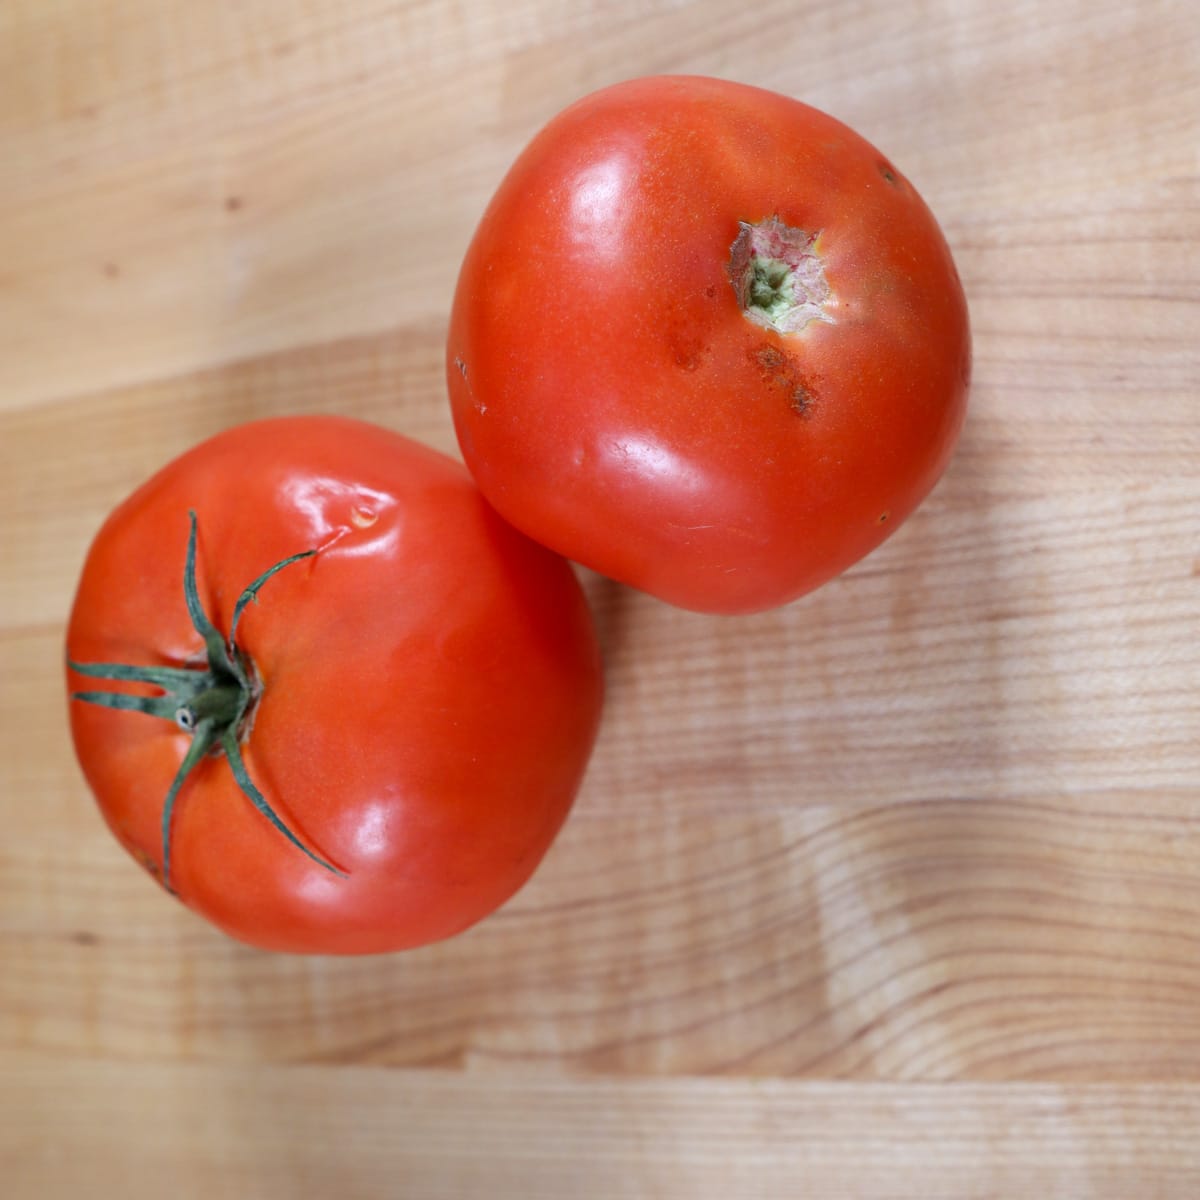 How to Tell if Tomato is Bad?